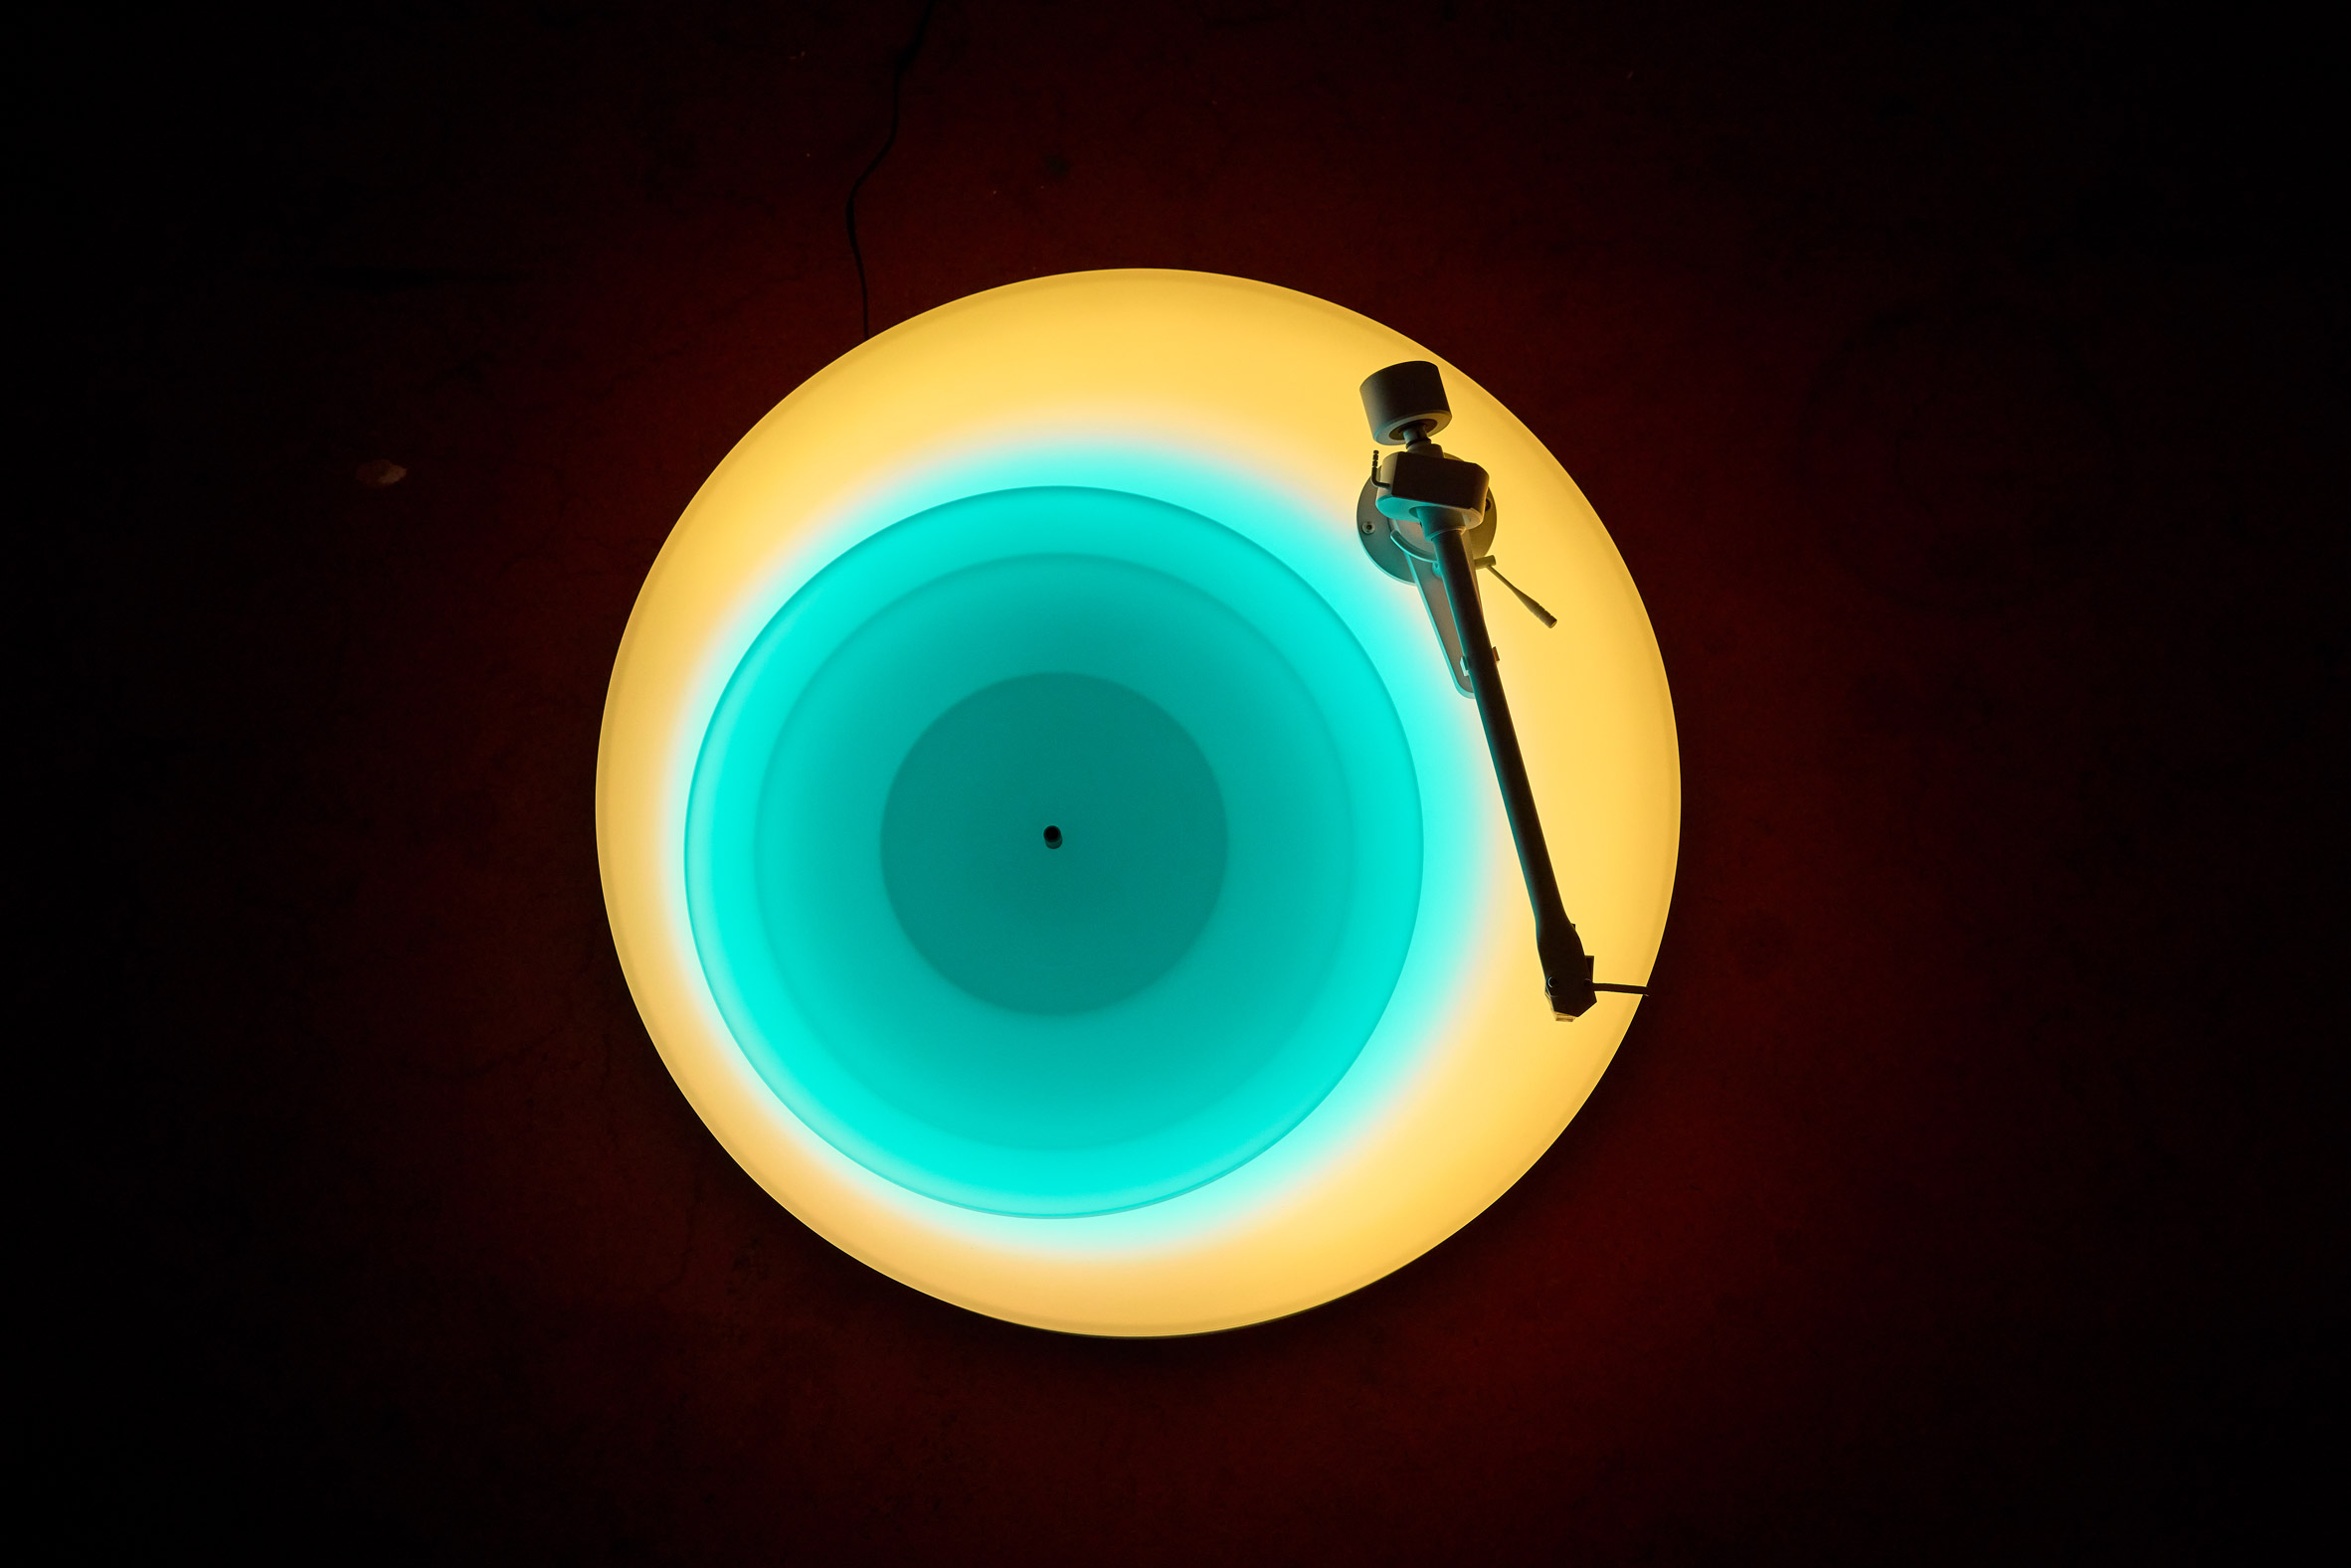 Overhead view of yellow and blue illuminated record player by Brian Eno